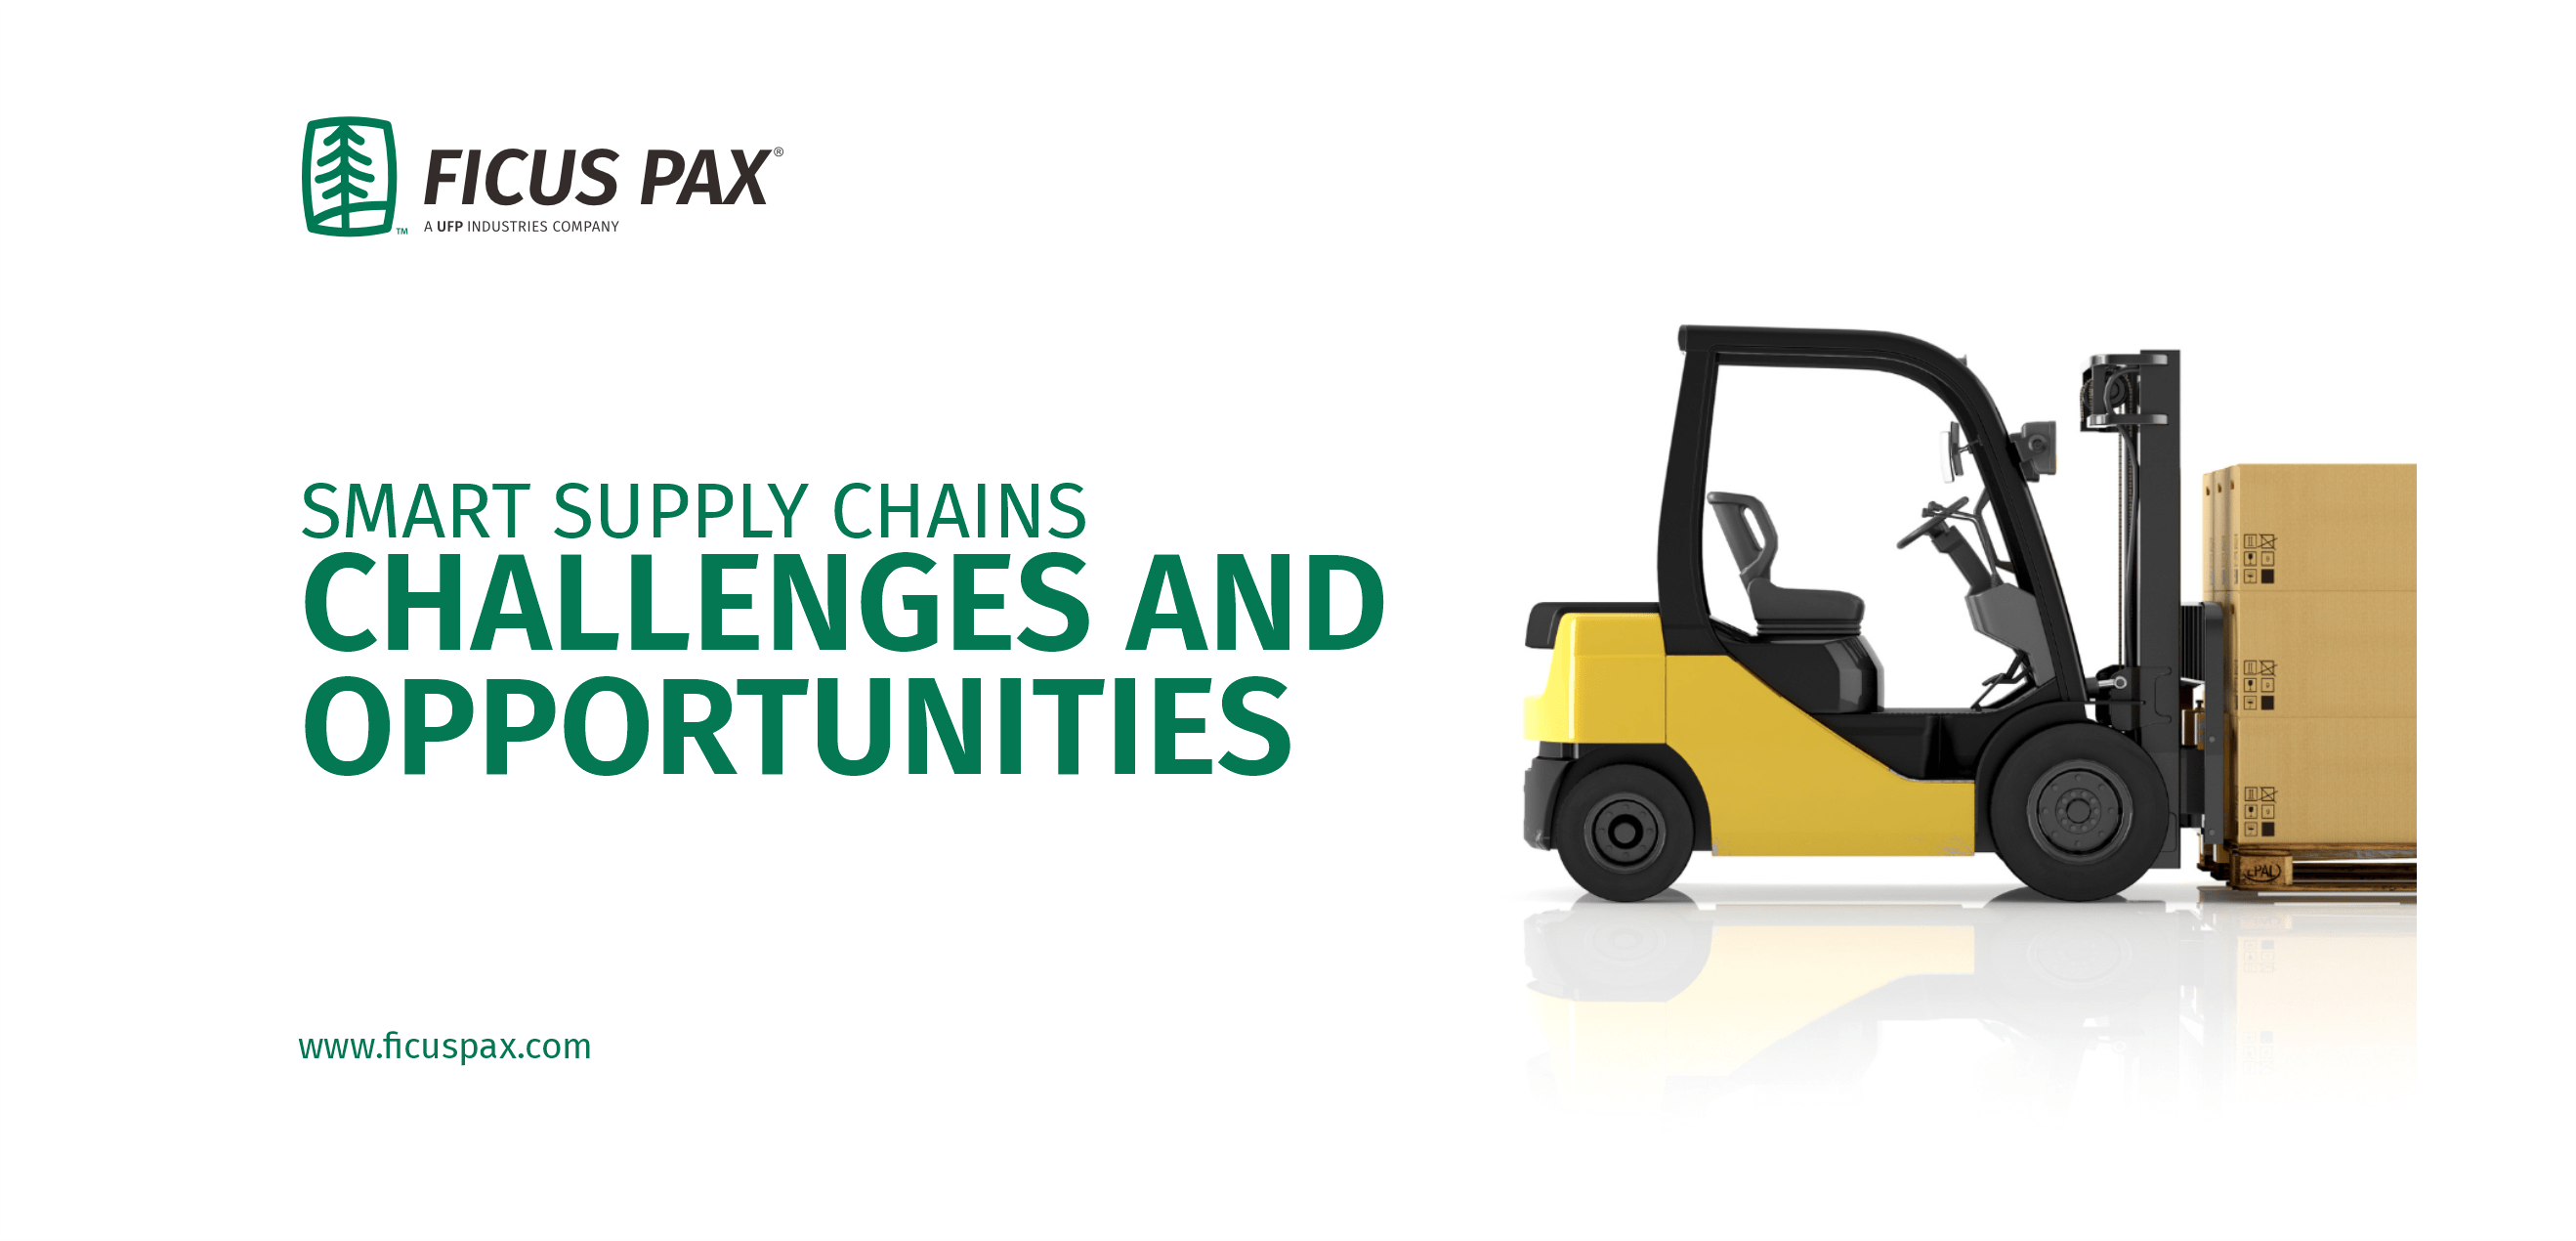 Smart Supply Chains - Challenges And Opportunities